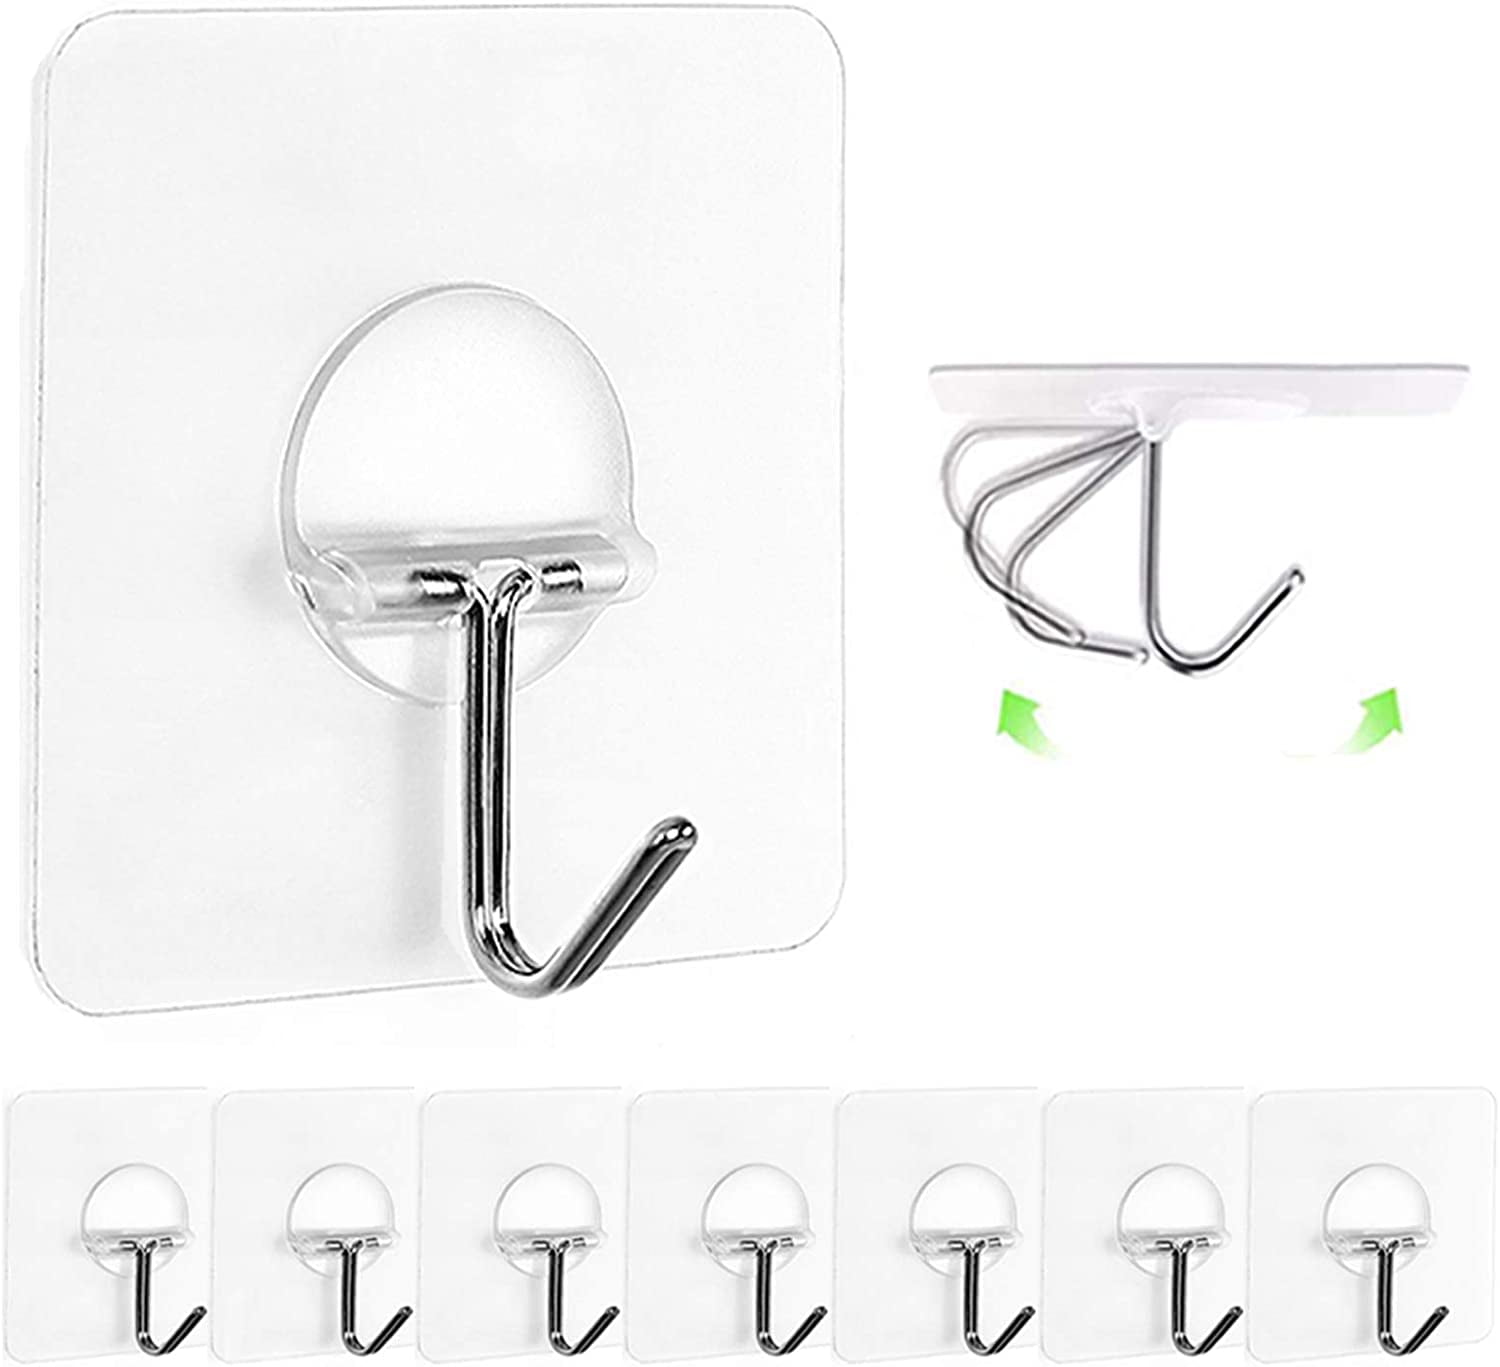 2Pcs Strong Alloy Self Adhesive Hooks Strong Sticky Stick on Wall Door Hooks New 